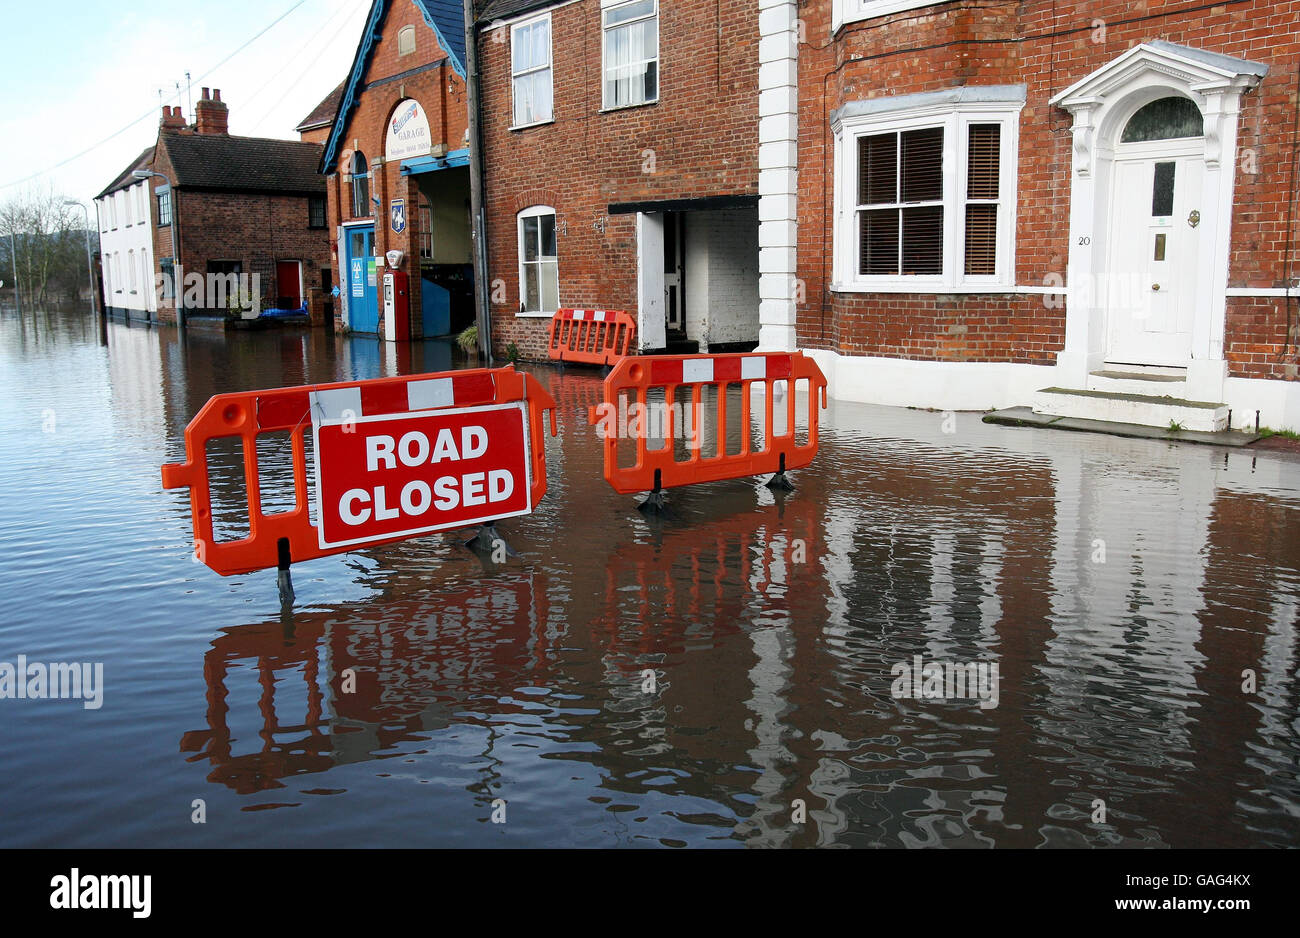 New Street in Upton on Severn in Worcestershire is closed due to flooding. Stock Photo